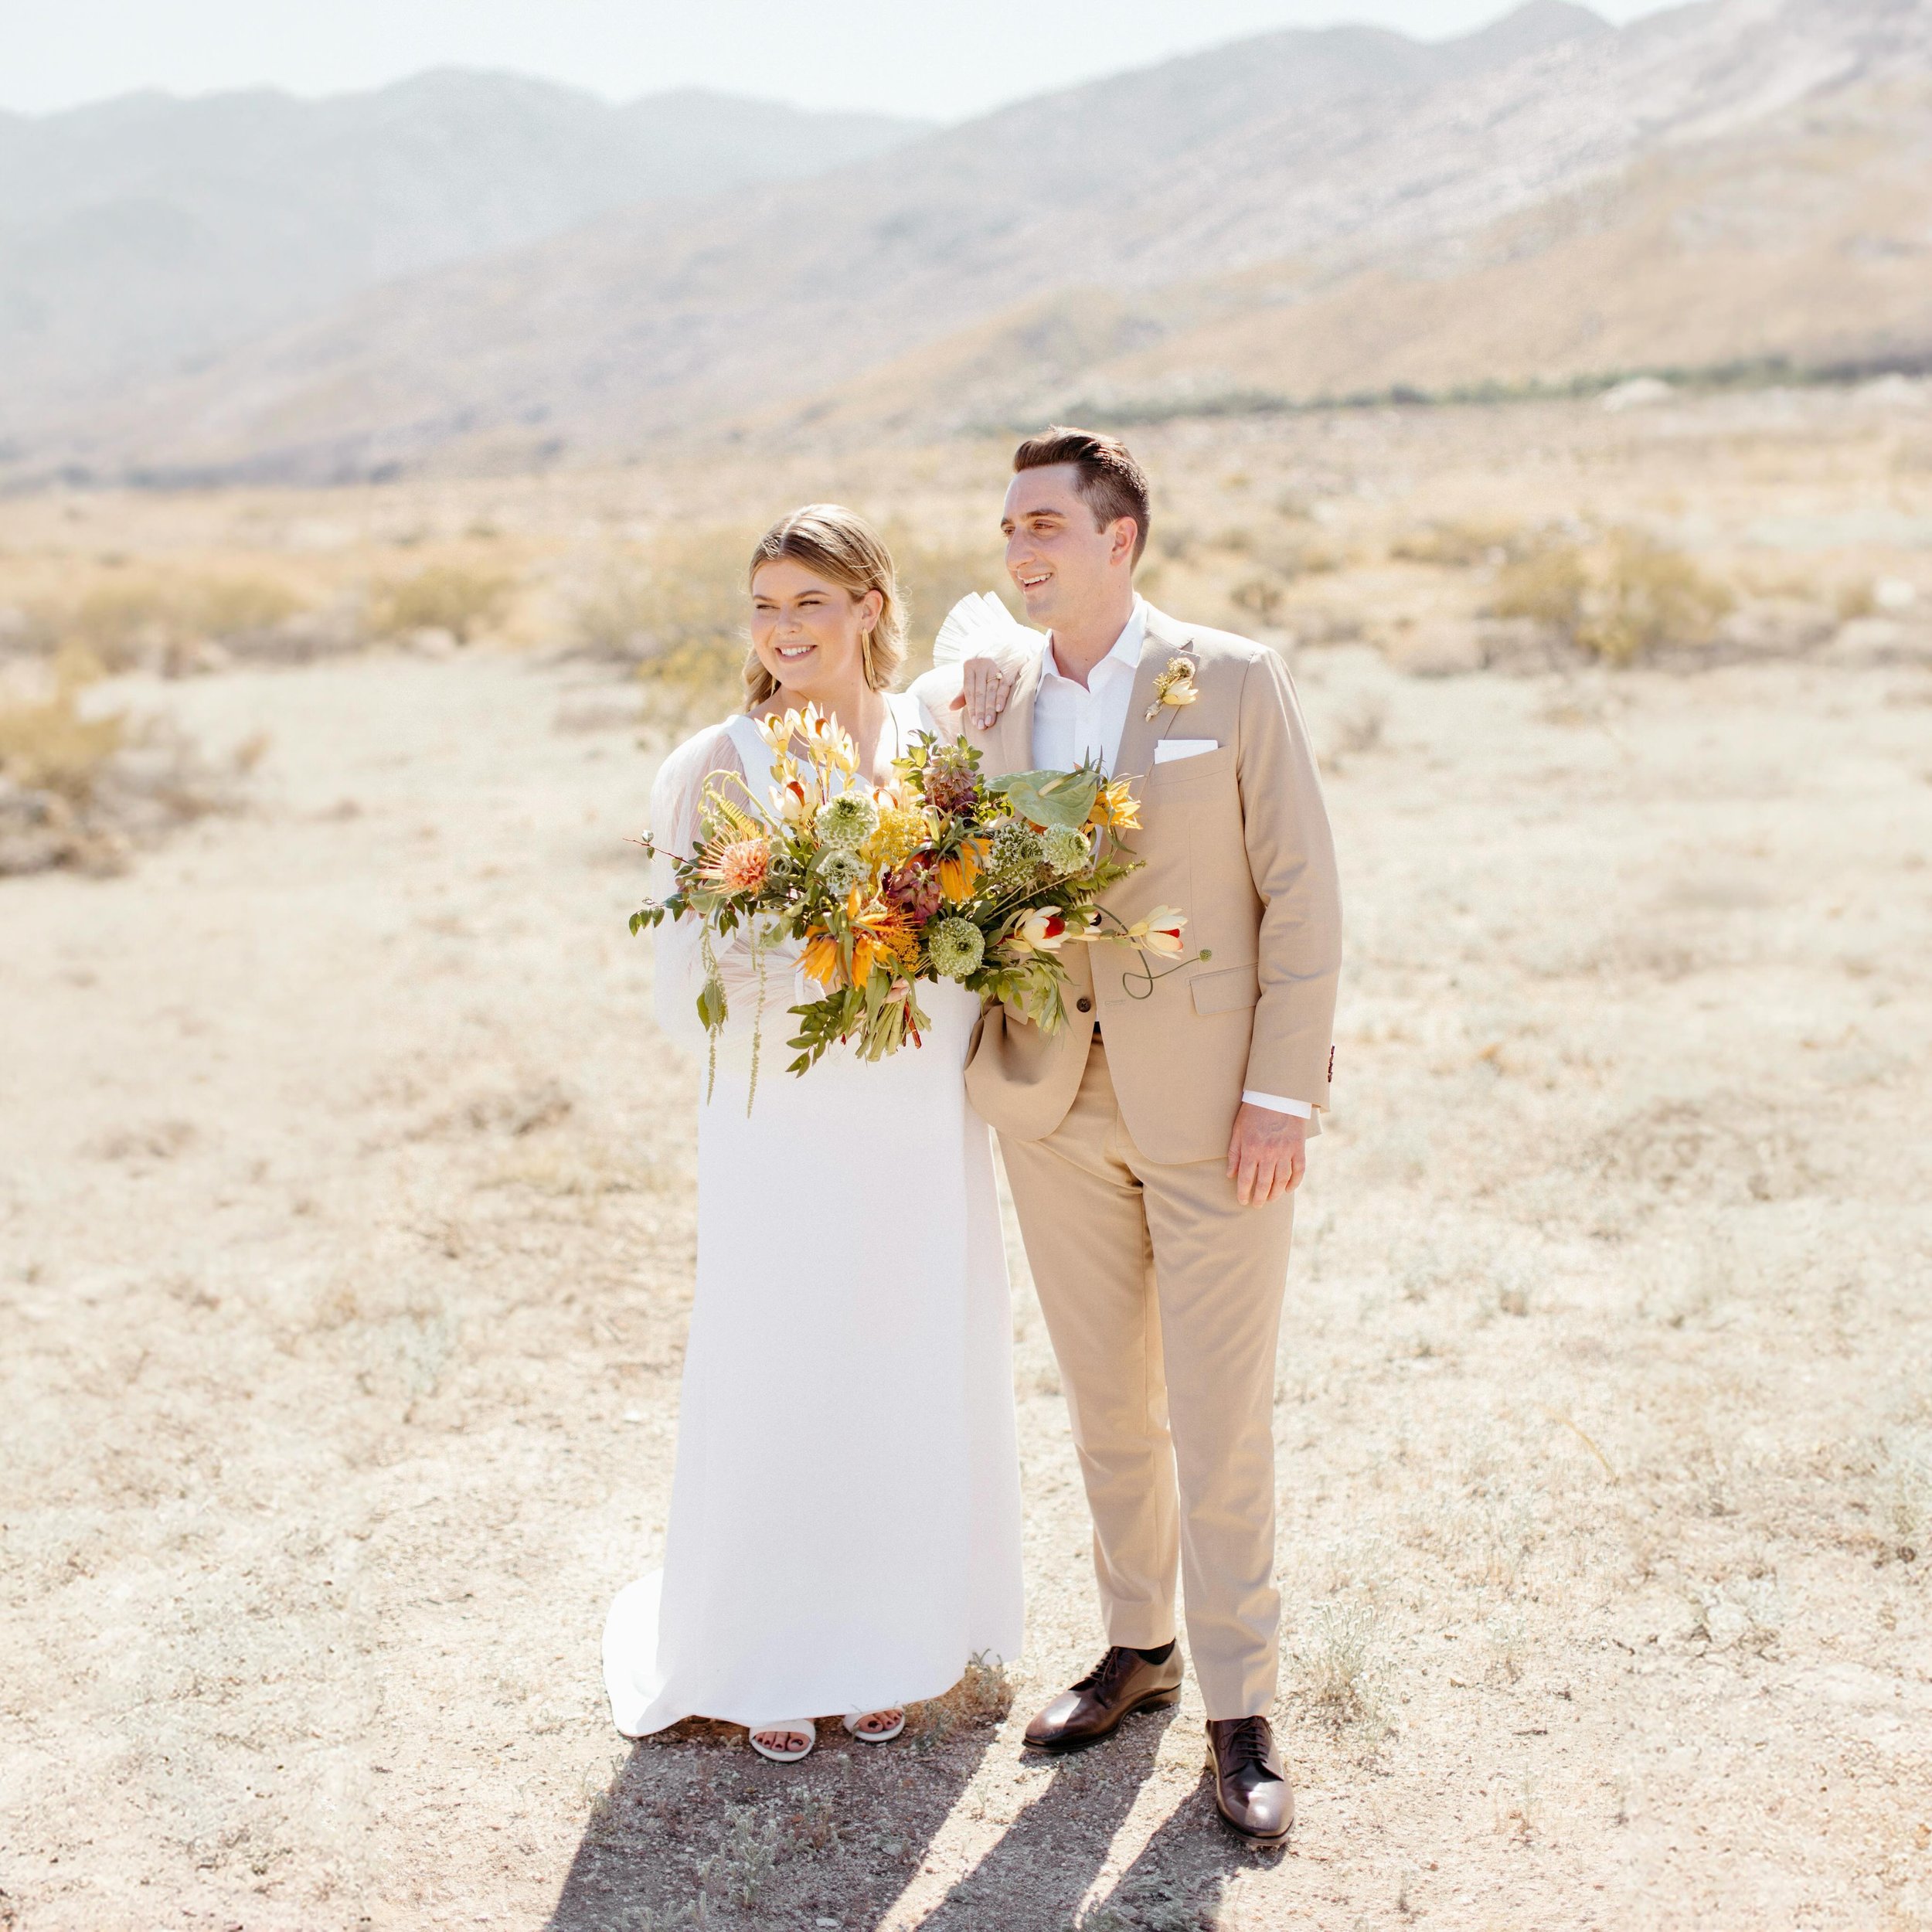 Alix and Andrew&rsquo;s gorgeously funky Palm Springs wedding is published on @brides! Link in our story to see why no one&rsquo;s surprised 😎